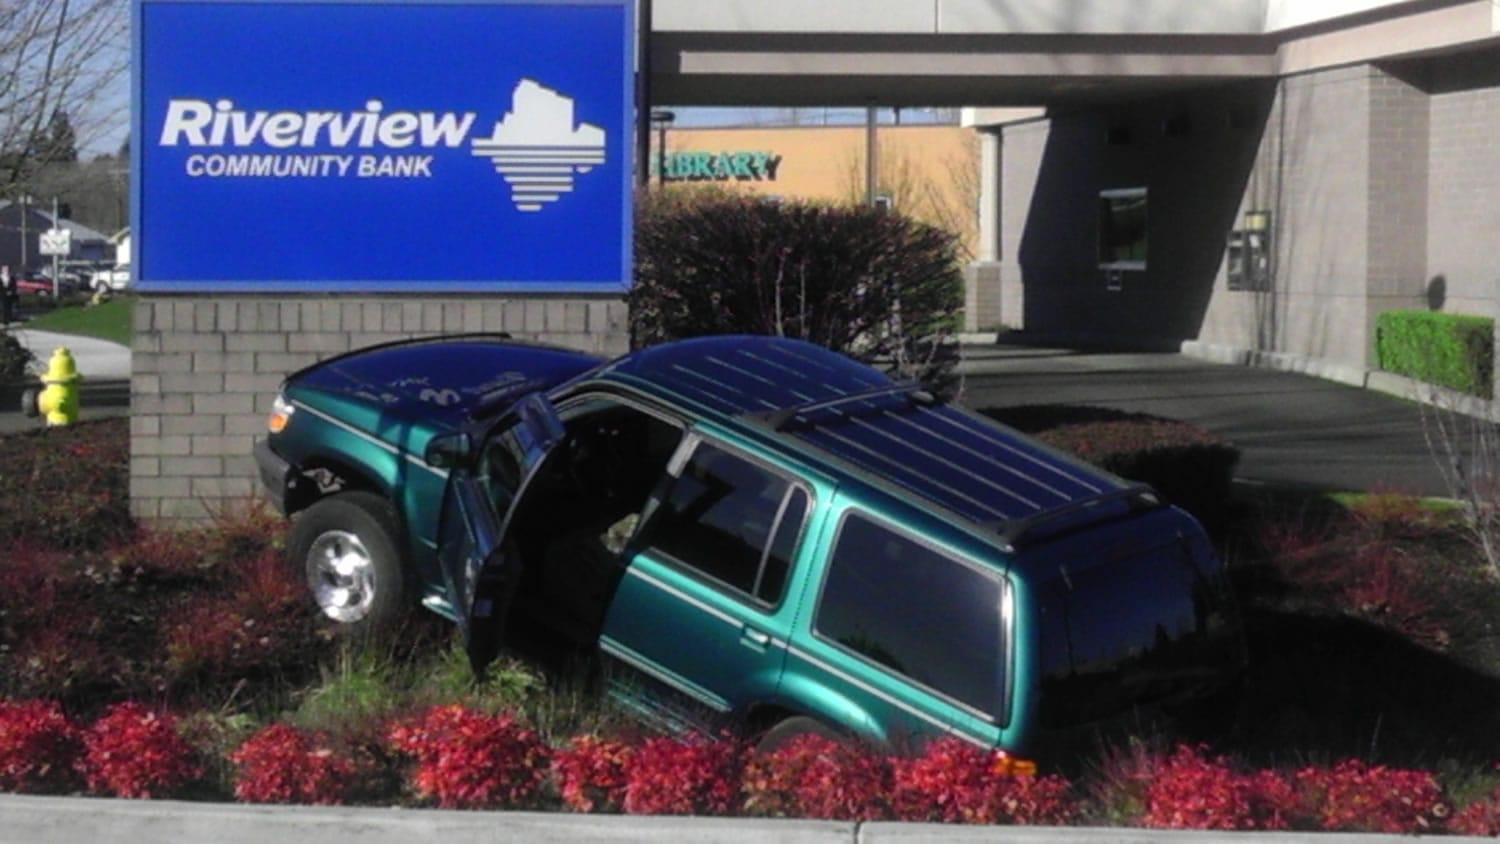 No injuries were reported Thursday when this SUV crashed into Riverview Community Bank's sign at its Salmon Creek Branch, 800 N.E. Tenney Road, about 1:50 p.m.